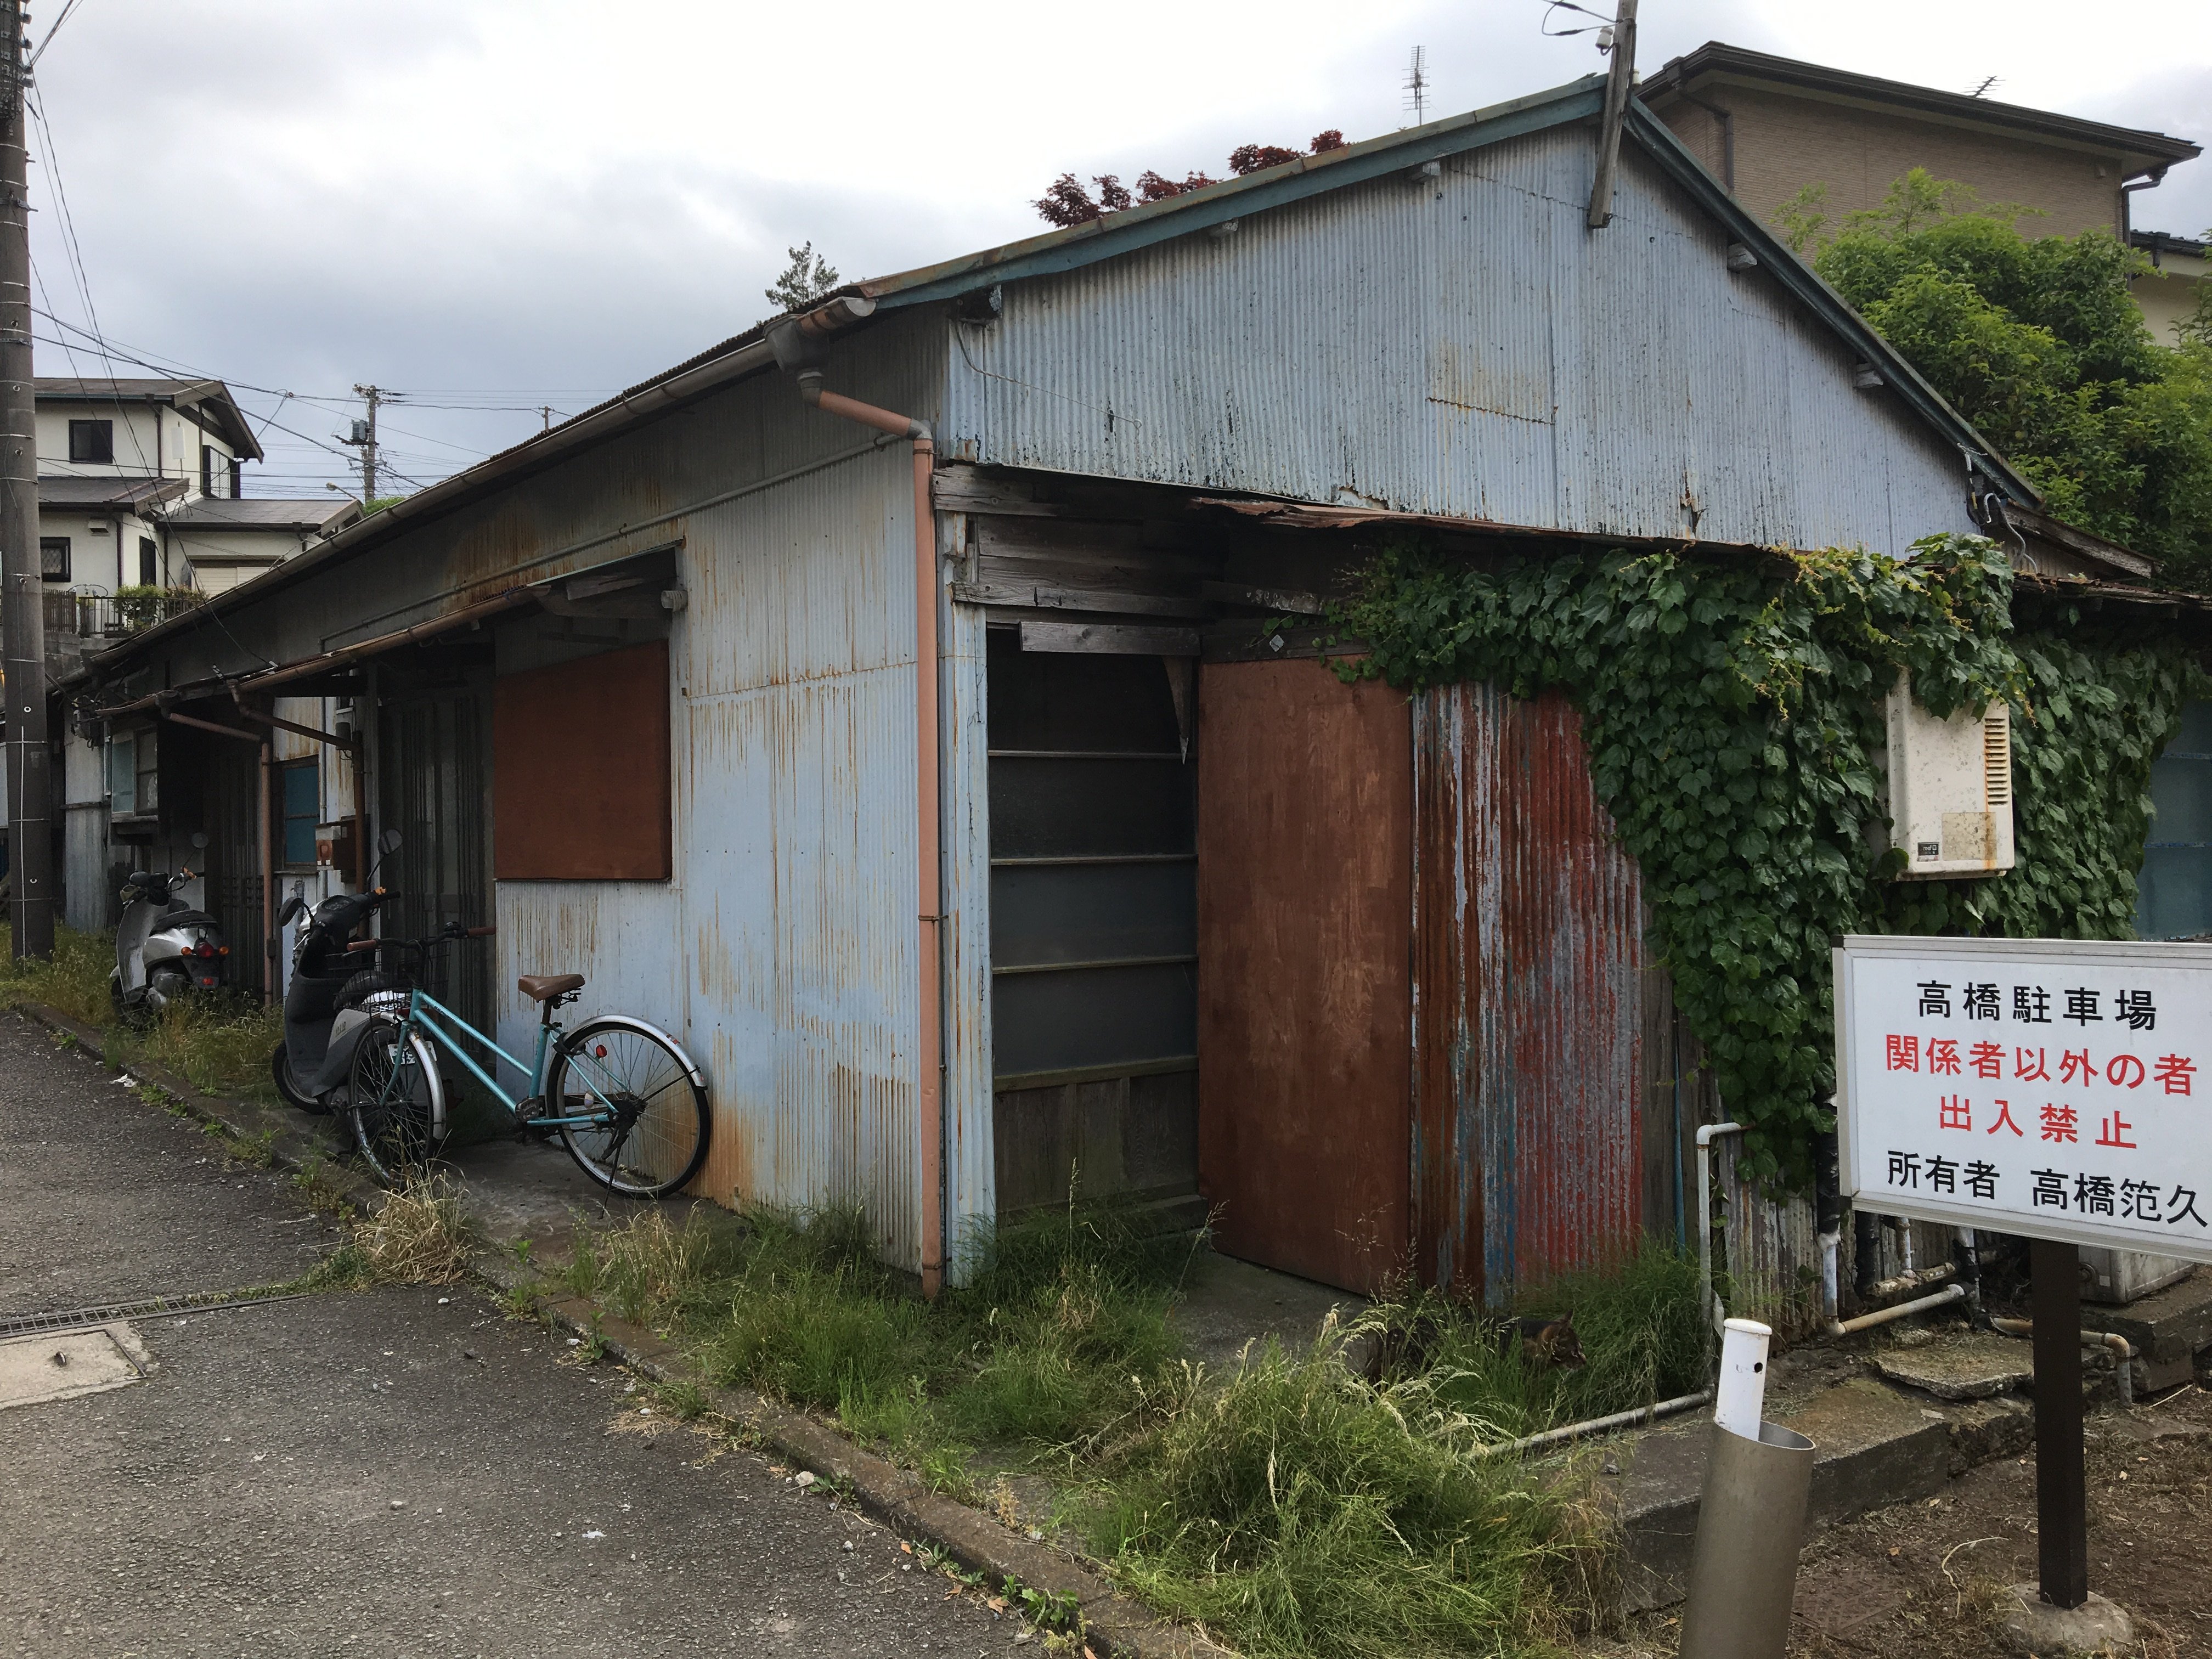 Japan has some 8.49 million unoccupied homes, according to a government survey in 2018. Photo: Julian Ryall